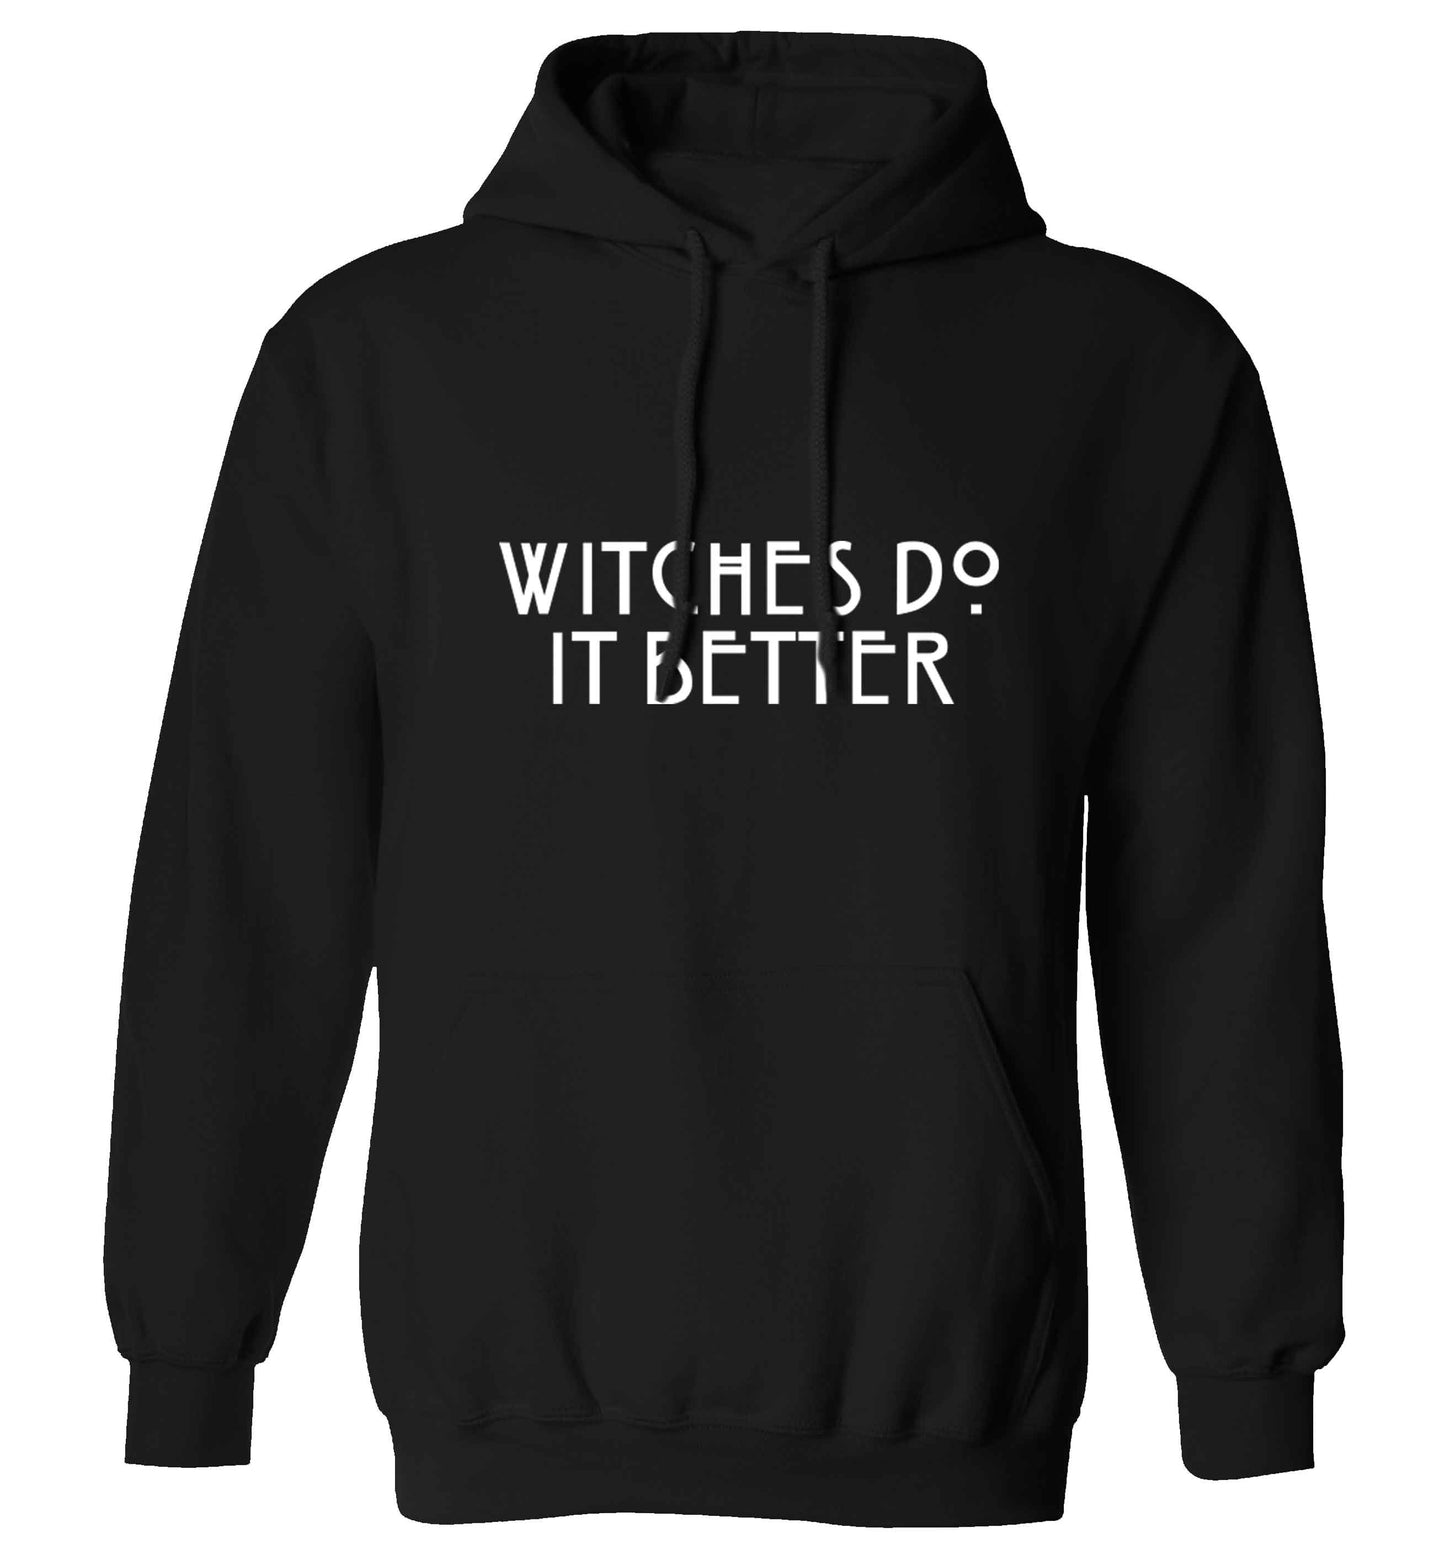 Witches do it better adults unisex black hoodie 2XL